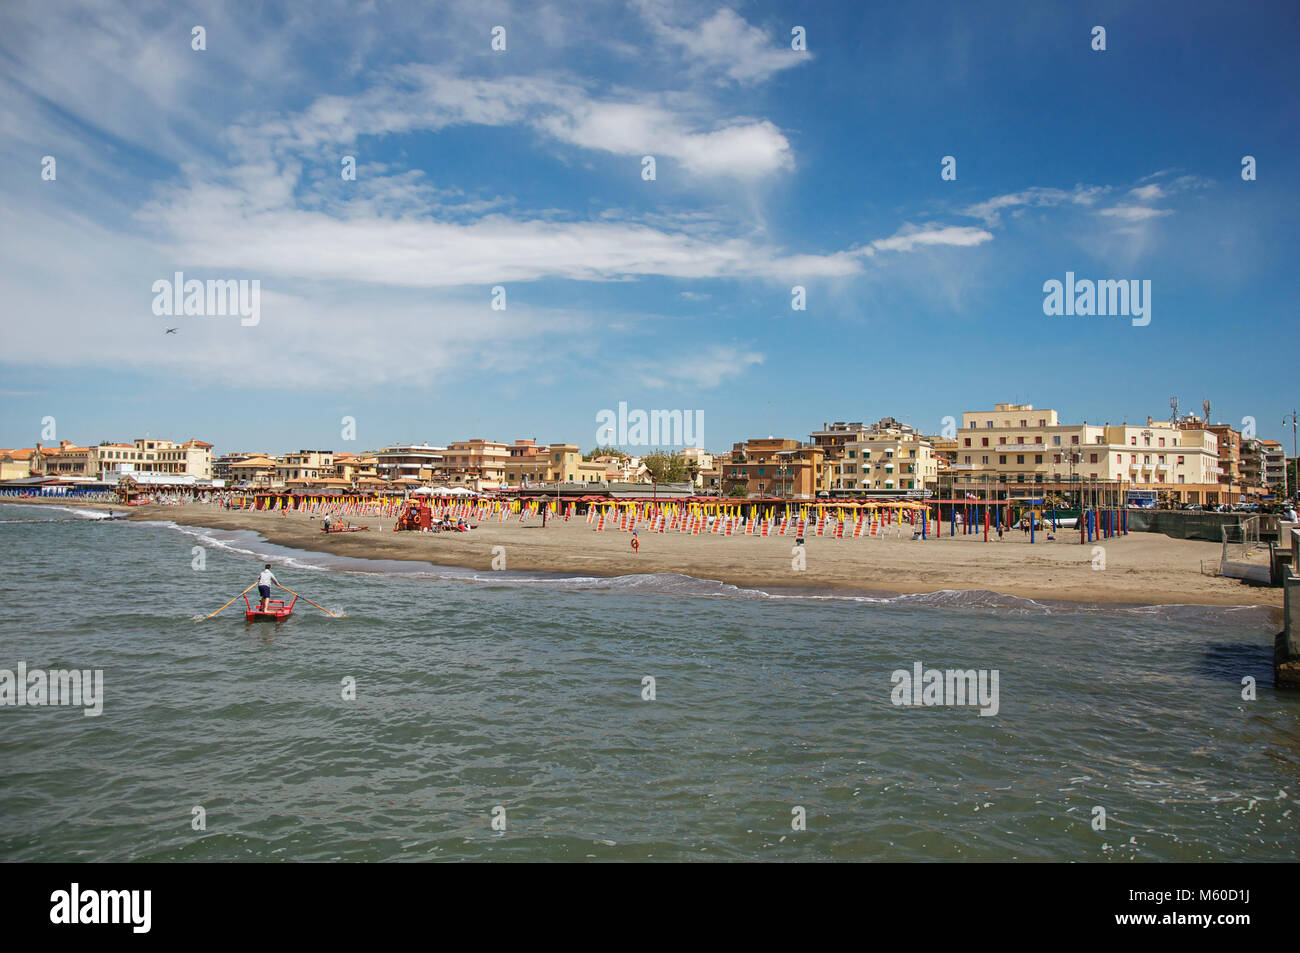 Ostia, Italy. View of the beach and town of Ostia between the Mediterranean sea and sunny sky The town is a seaside resort and ancient port of Rome. Stock Photo